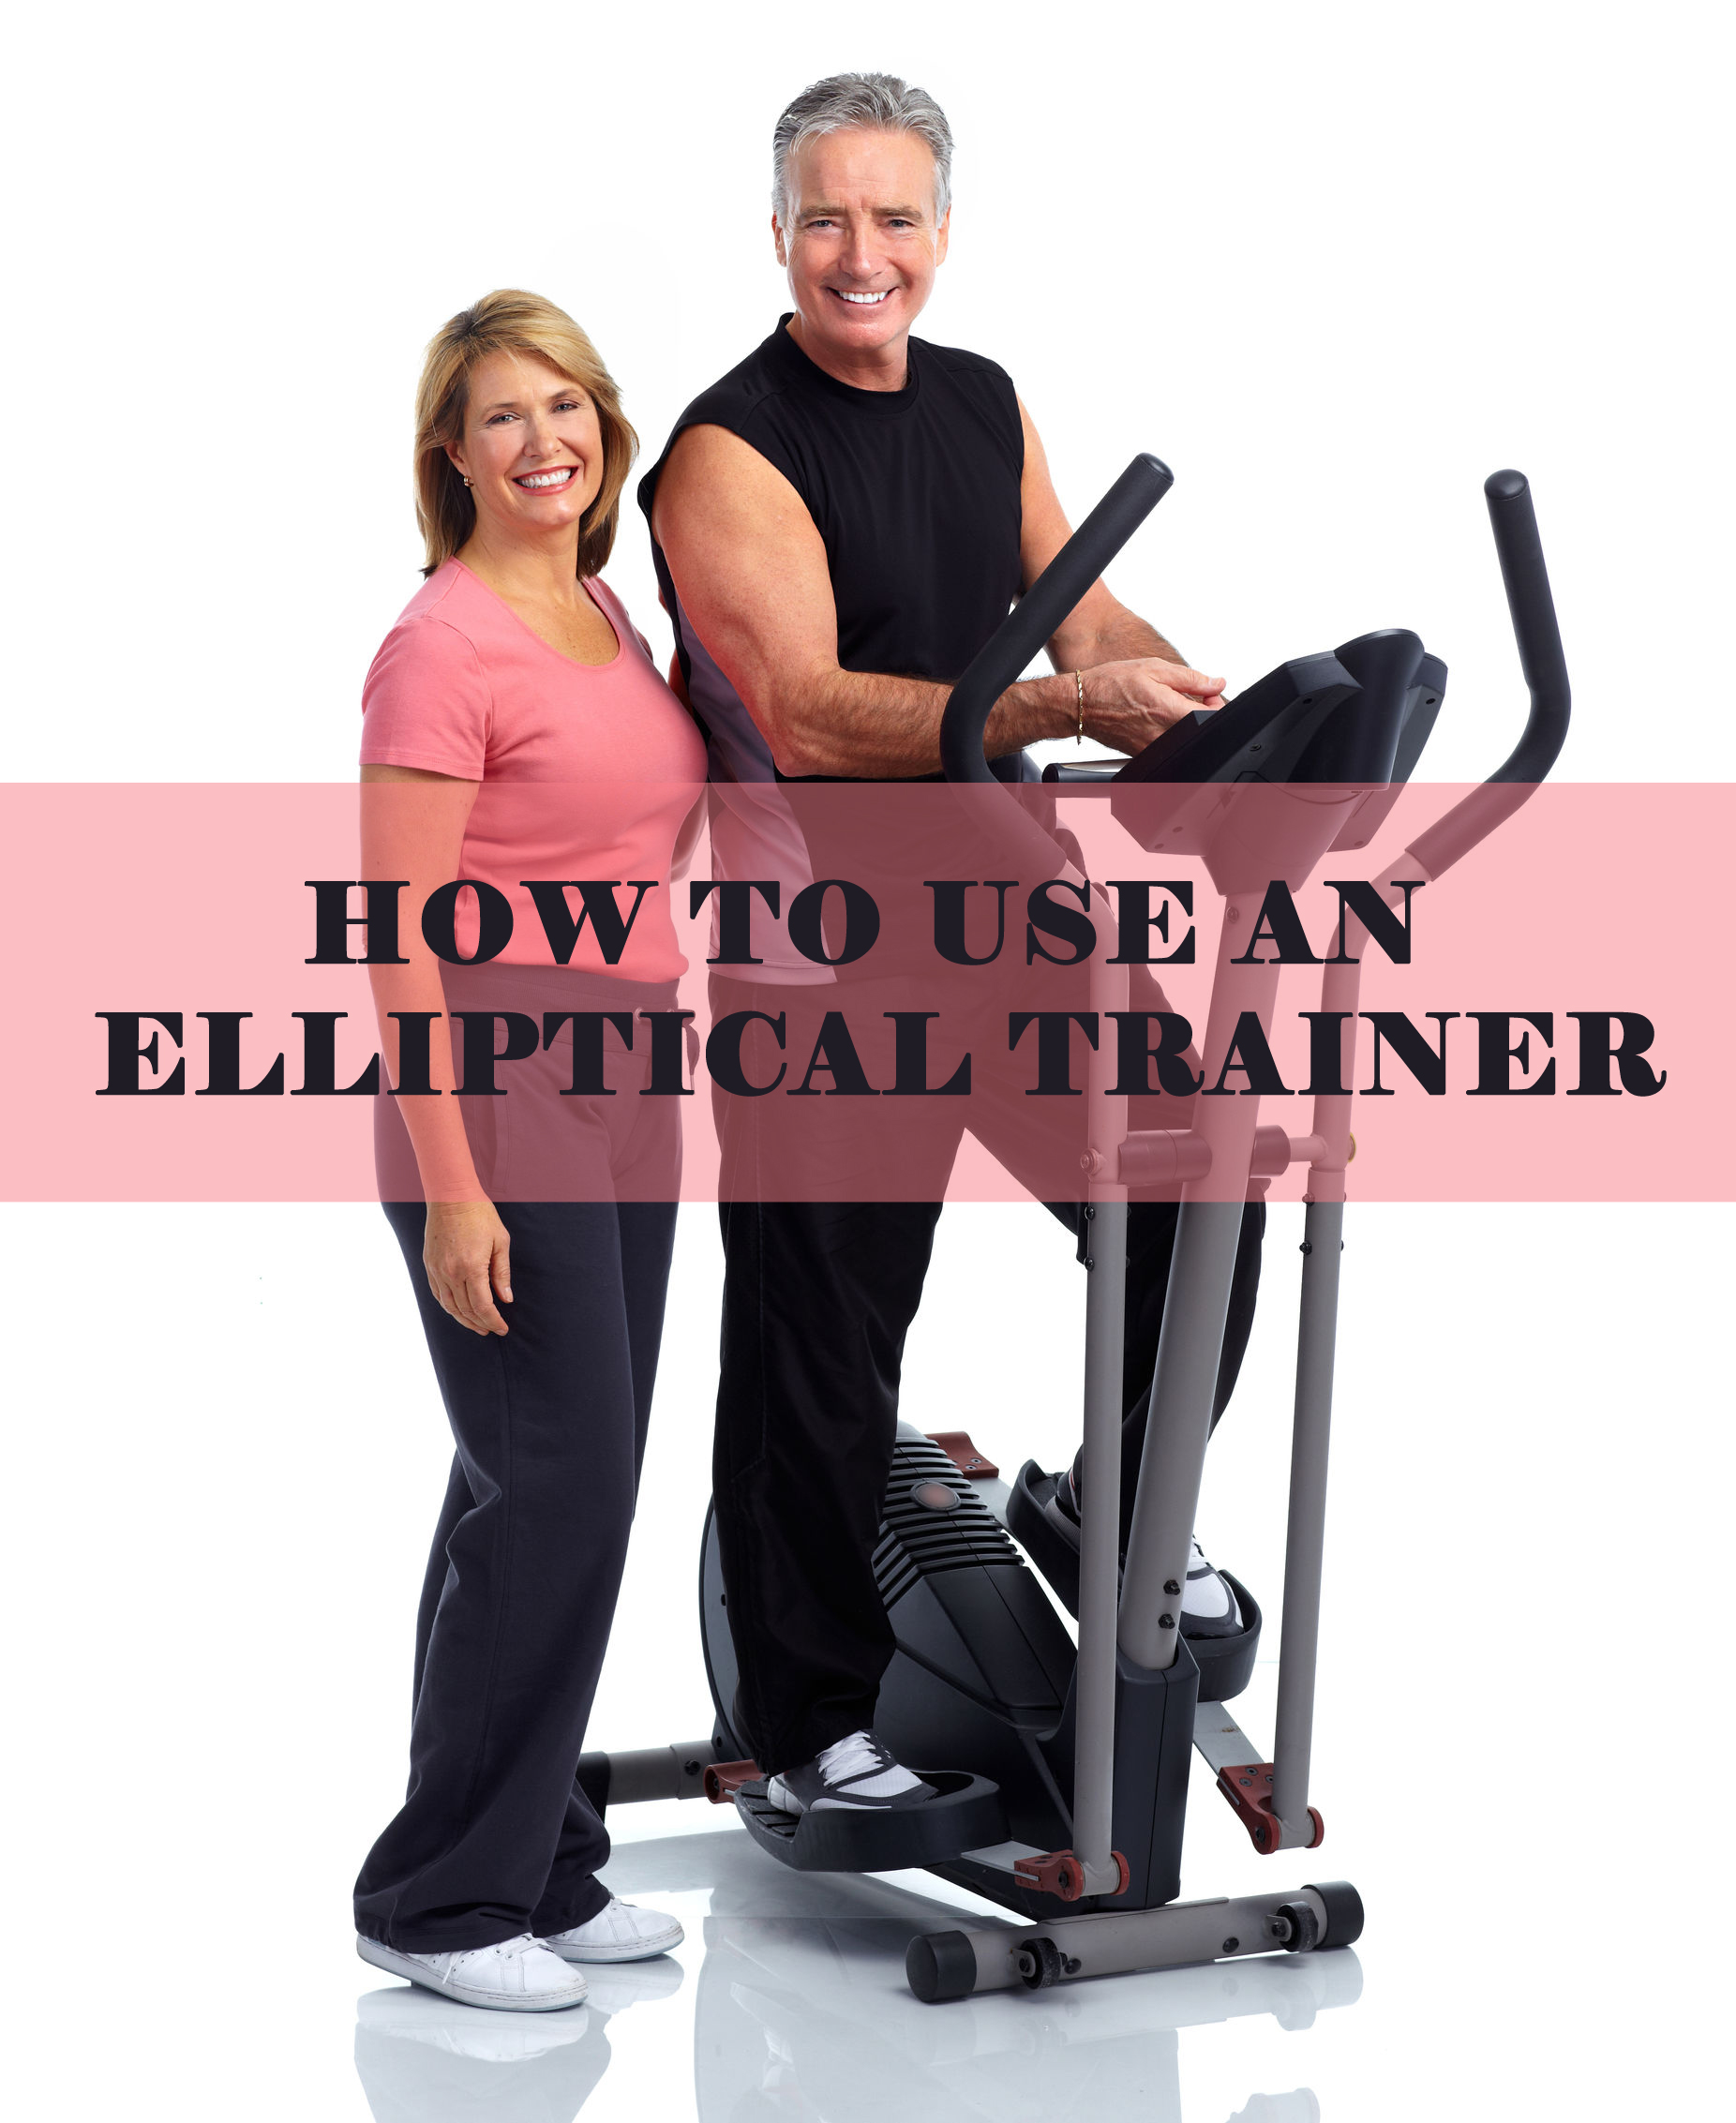 How to Use an Elliptical Trainer